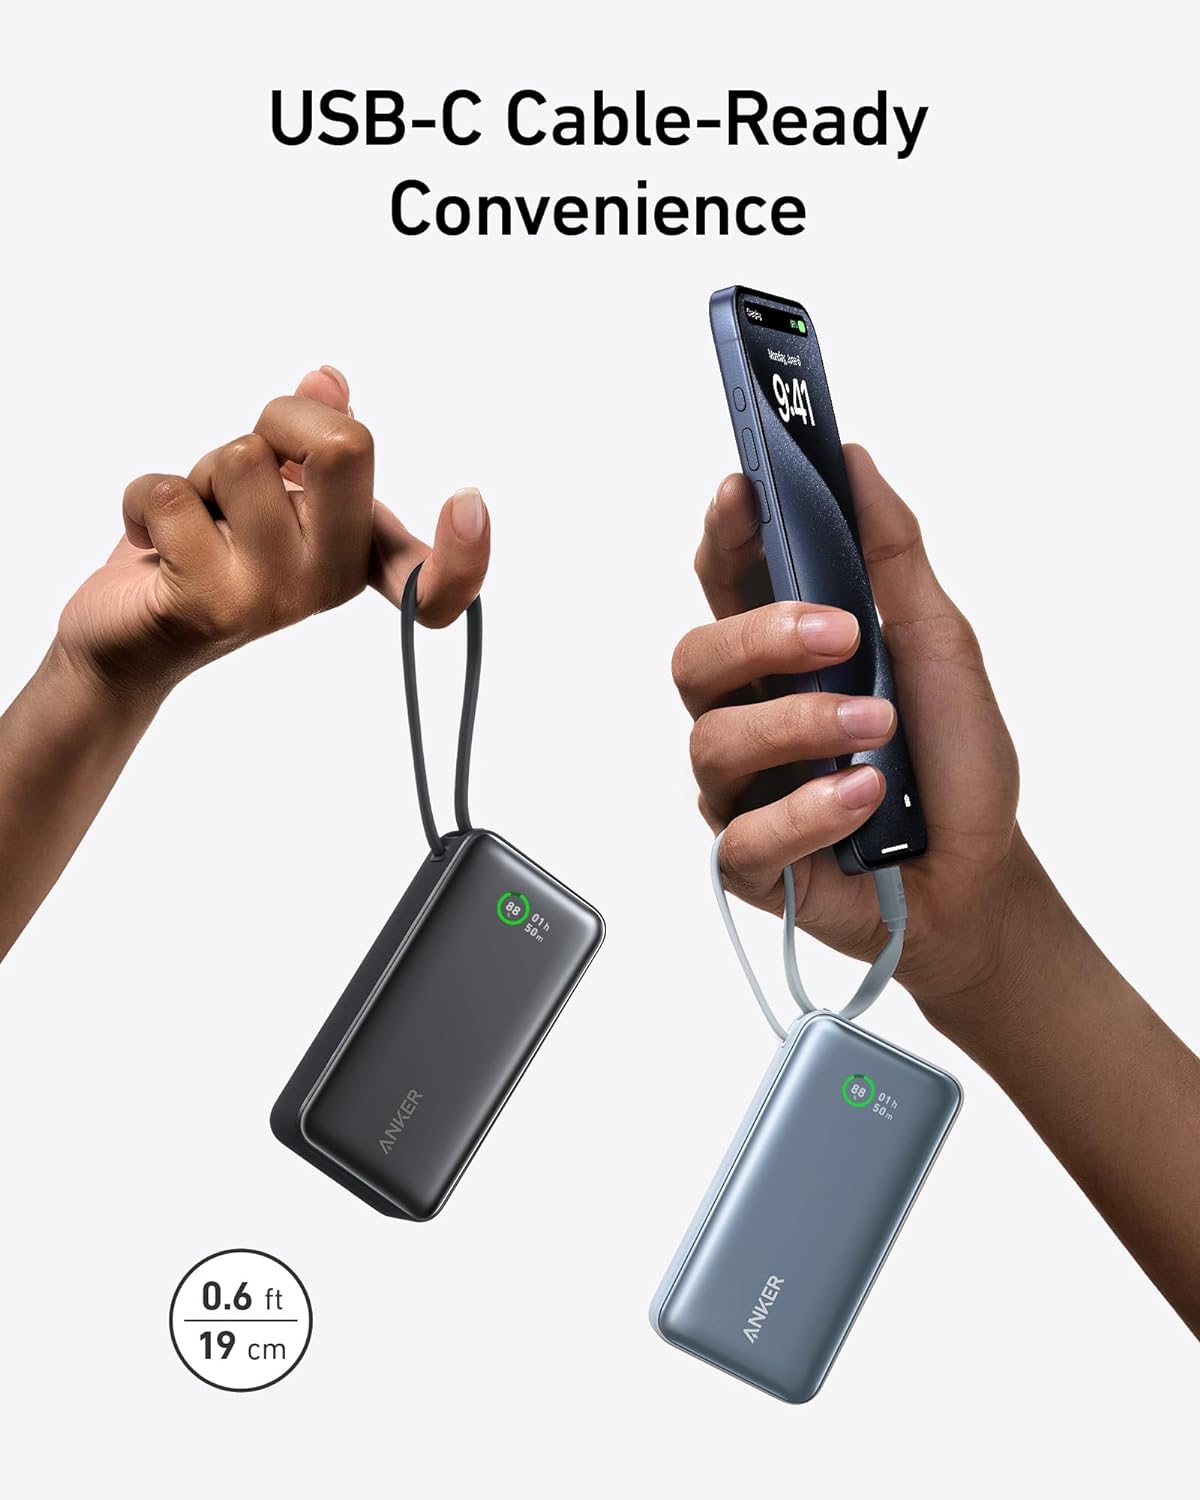 Anker Nano Power Bank 10,000mAh Portable Charger with Built-in USB-C - Black